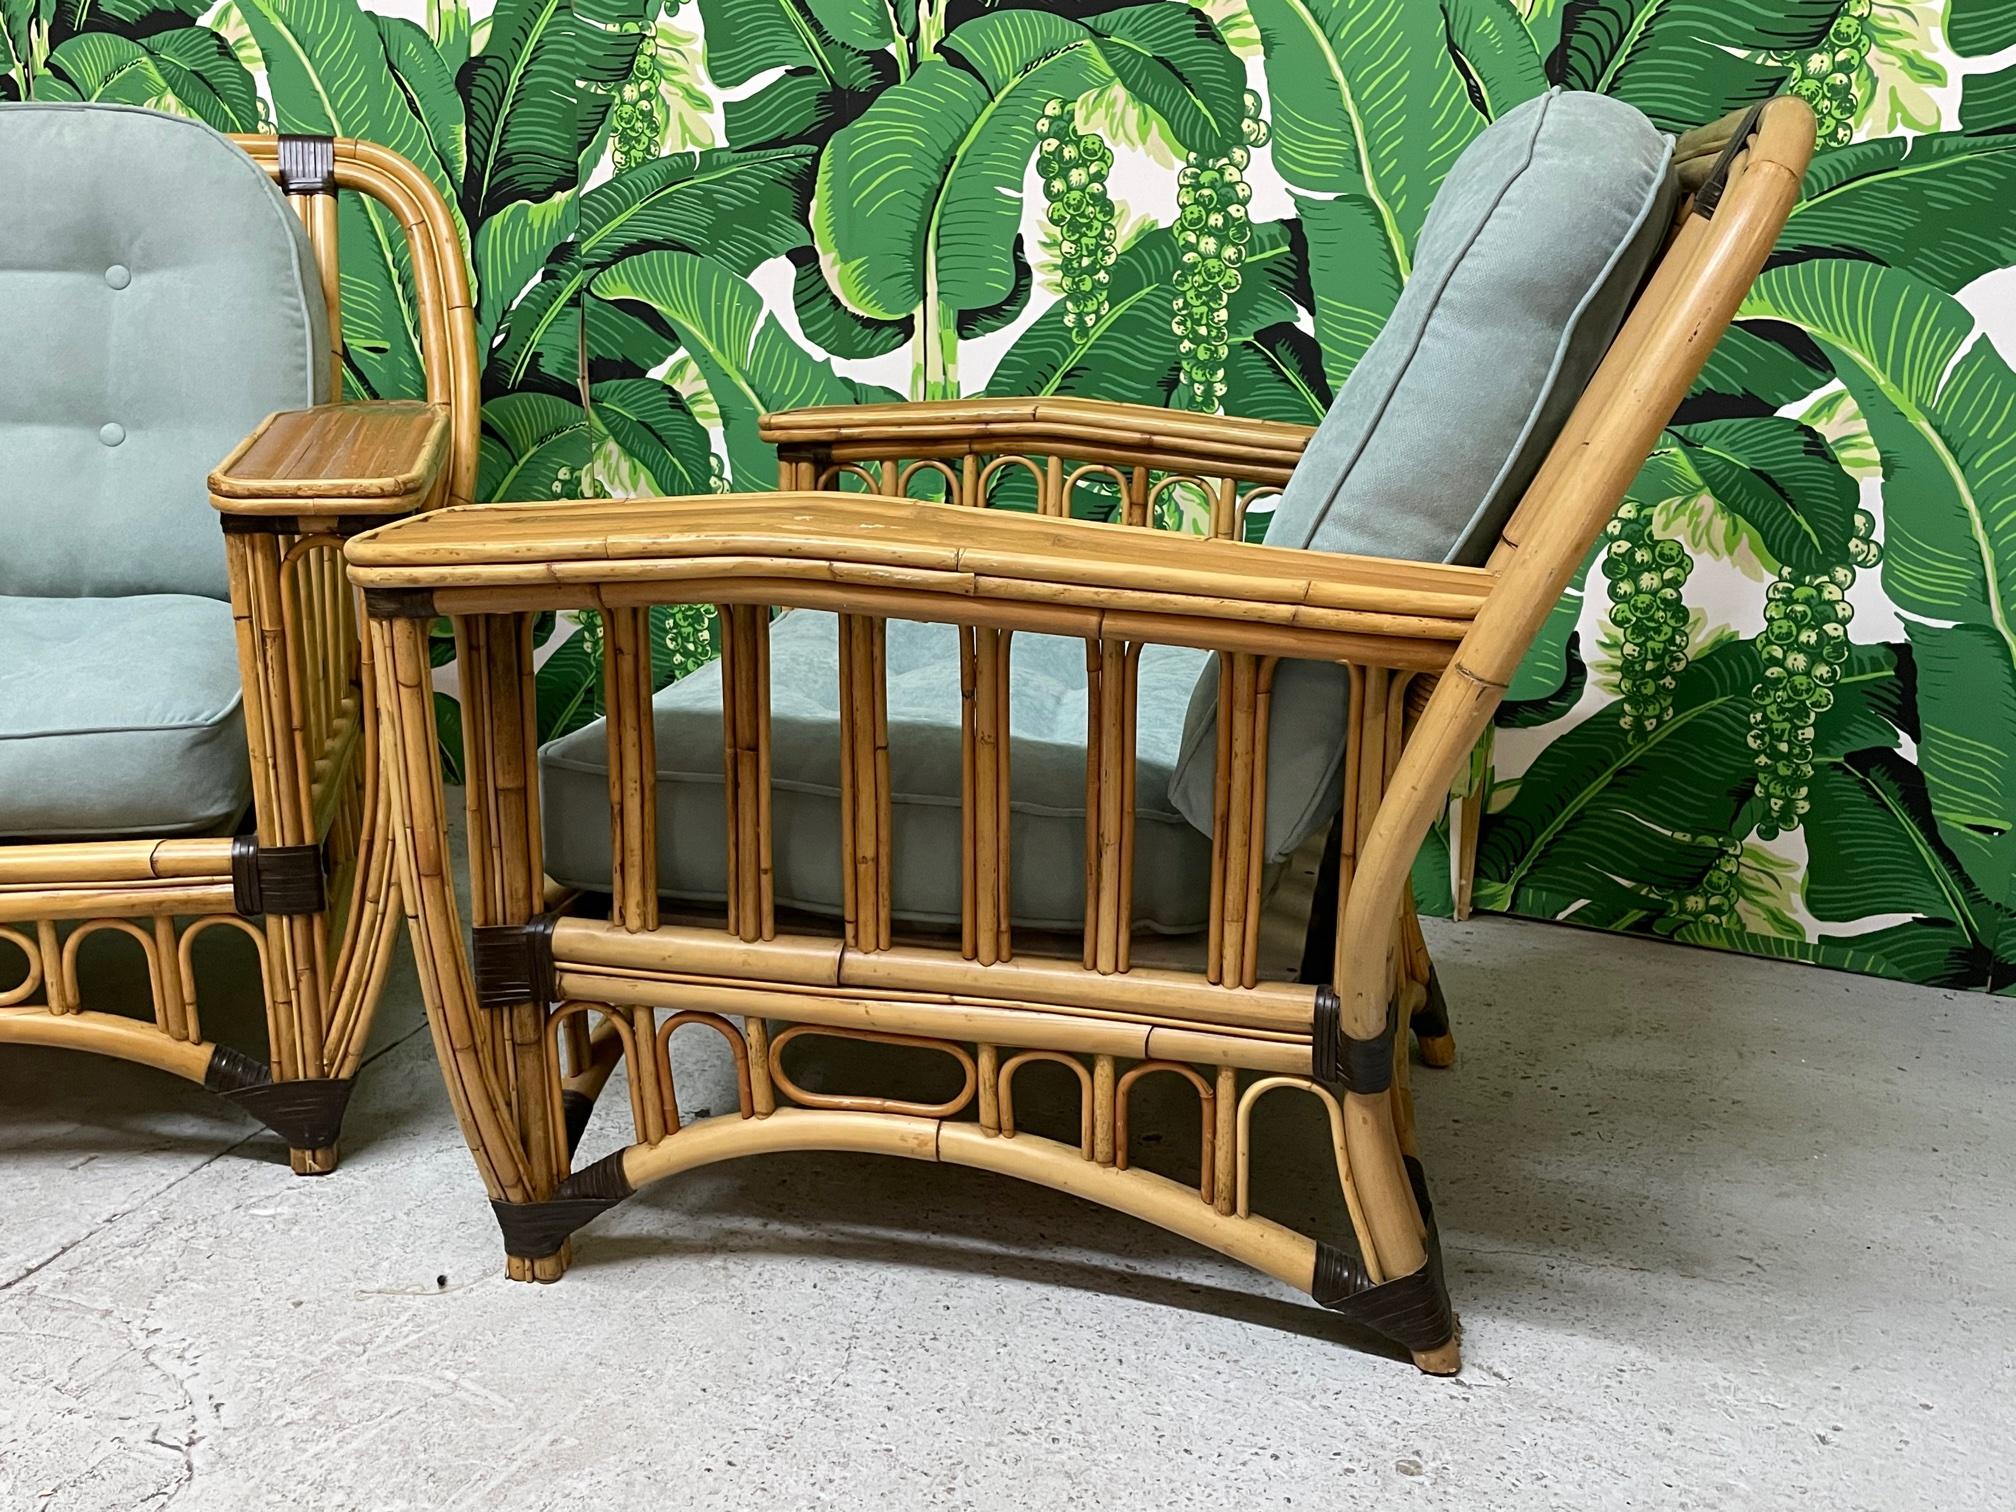 Pair of large rattan club chairs feature two tone design and split reed veneered arms. Extremely comfortable. Good condition with only minor imperfections consistent with age.